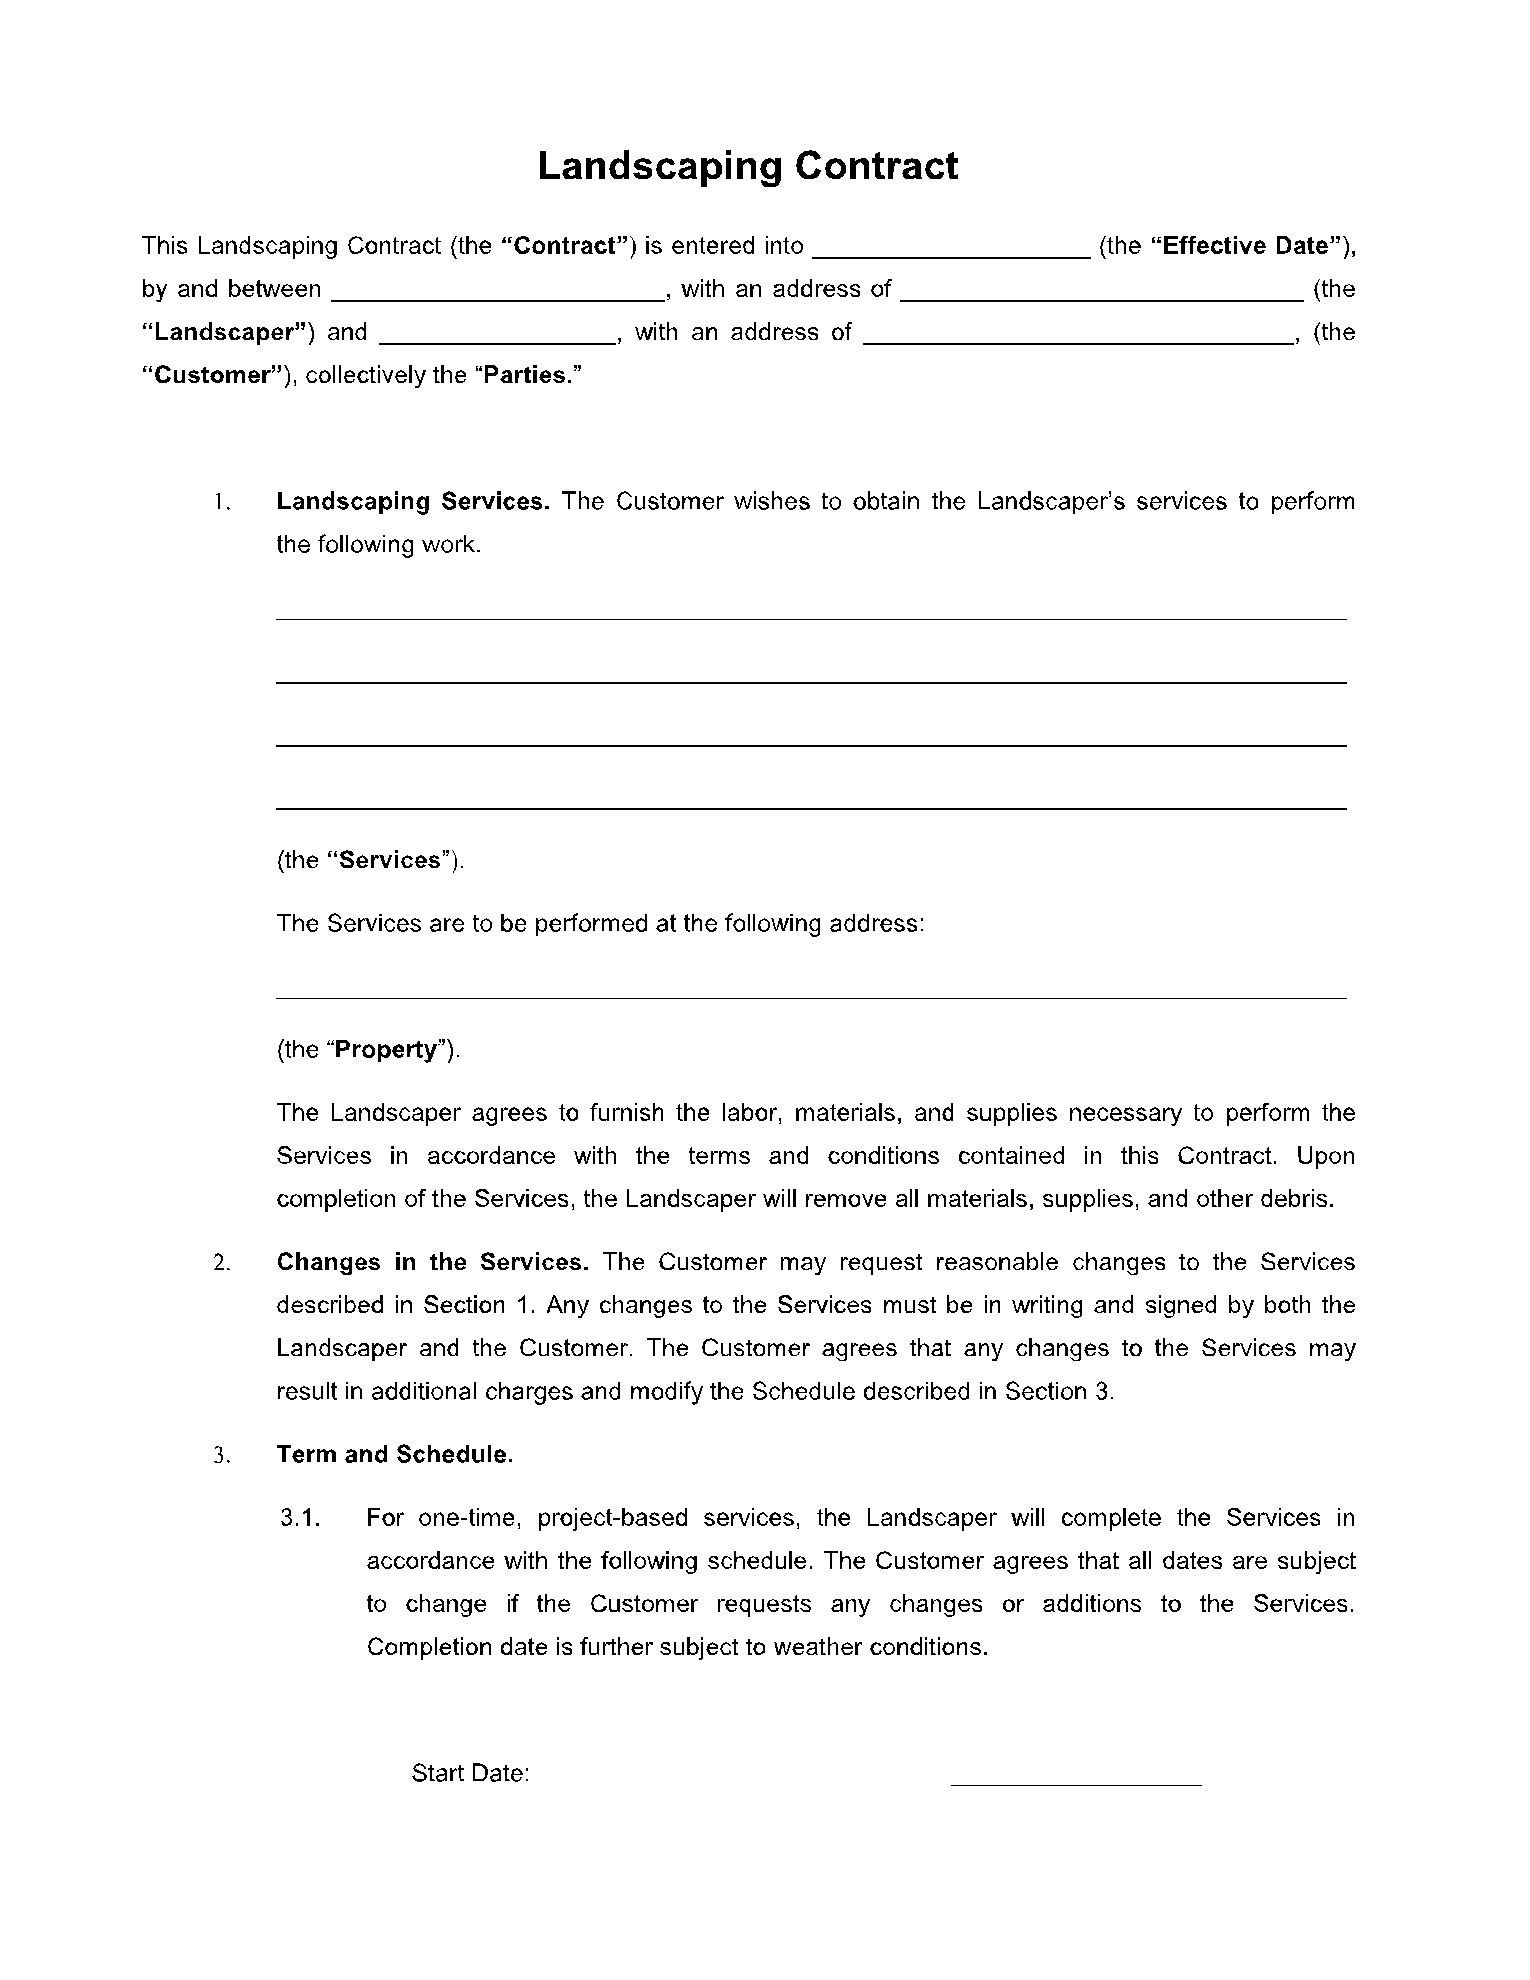 Landscaping Contract 1